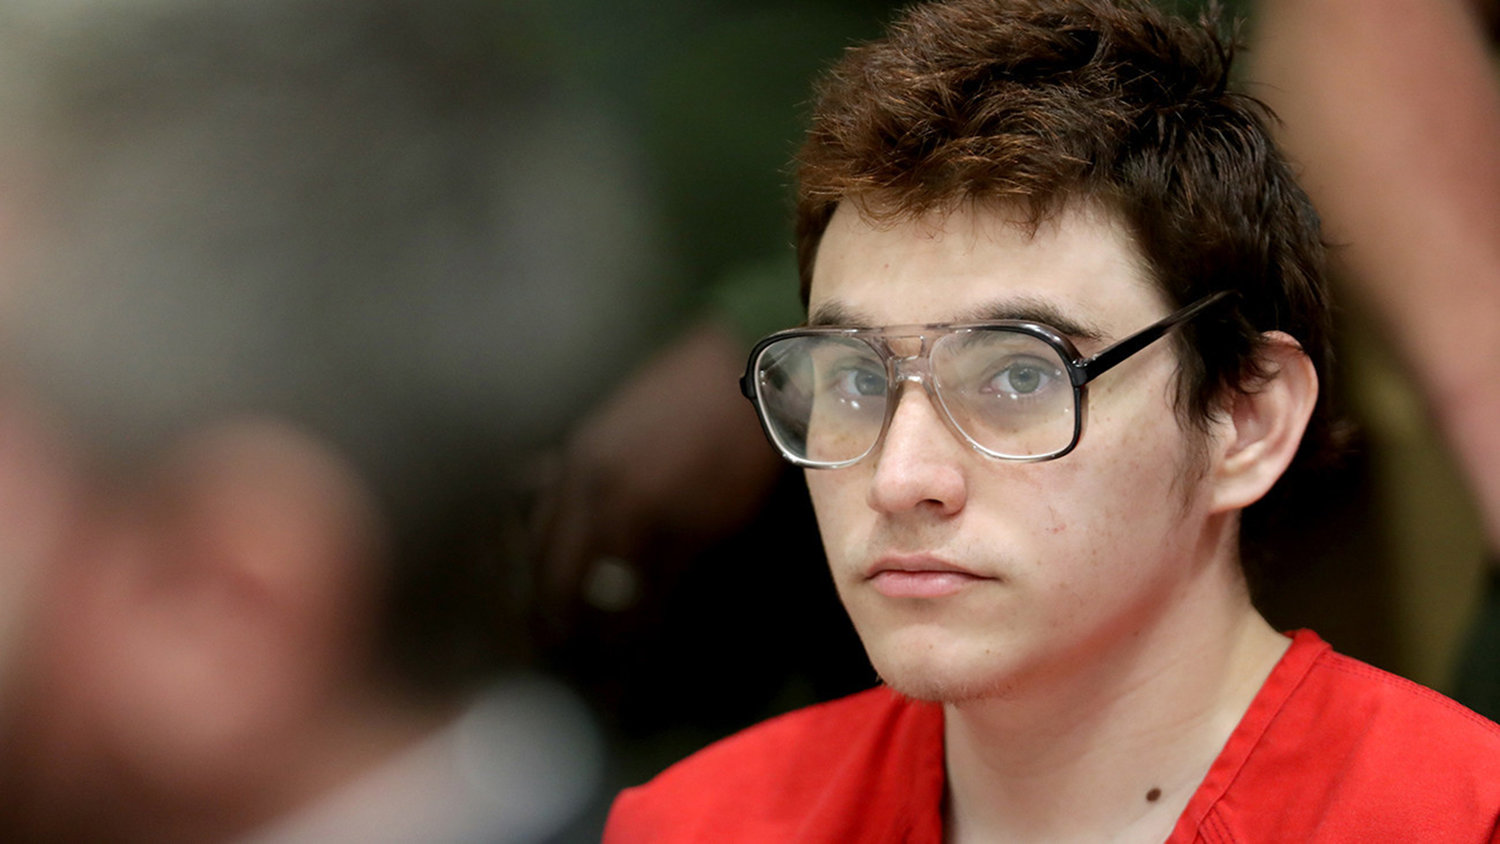 Parkland school shooter Nikolas Cruz looks towards the prosecution table during a hearing at the Broward Courthouse in Fort Lauderdale on Friday, April 5, 2019. (Amy Beth Bennett/Sun Sentinel/TNS)